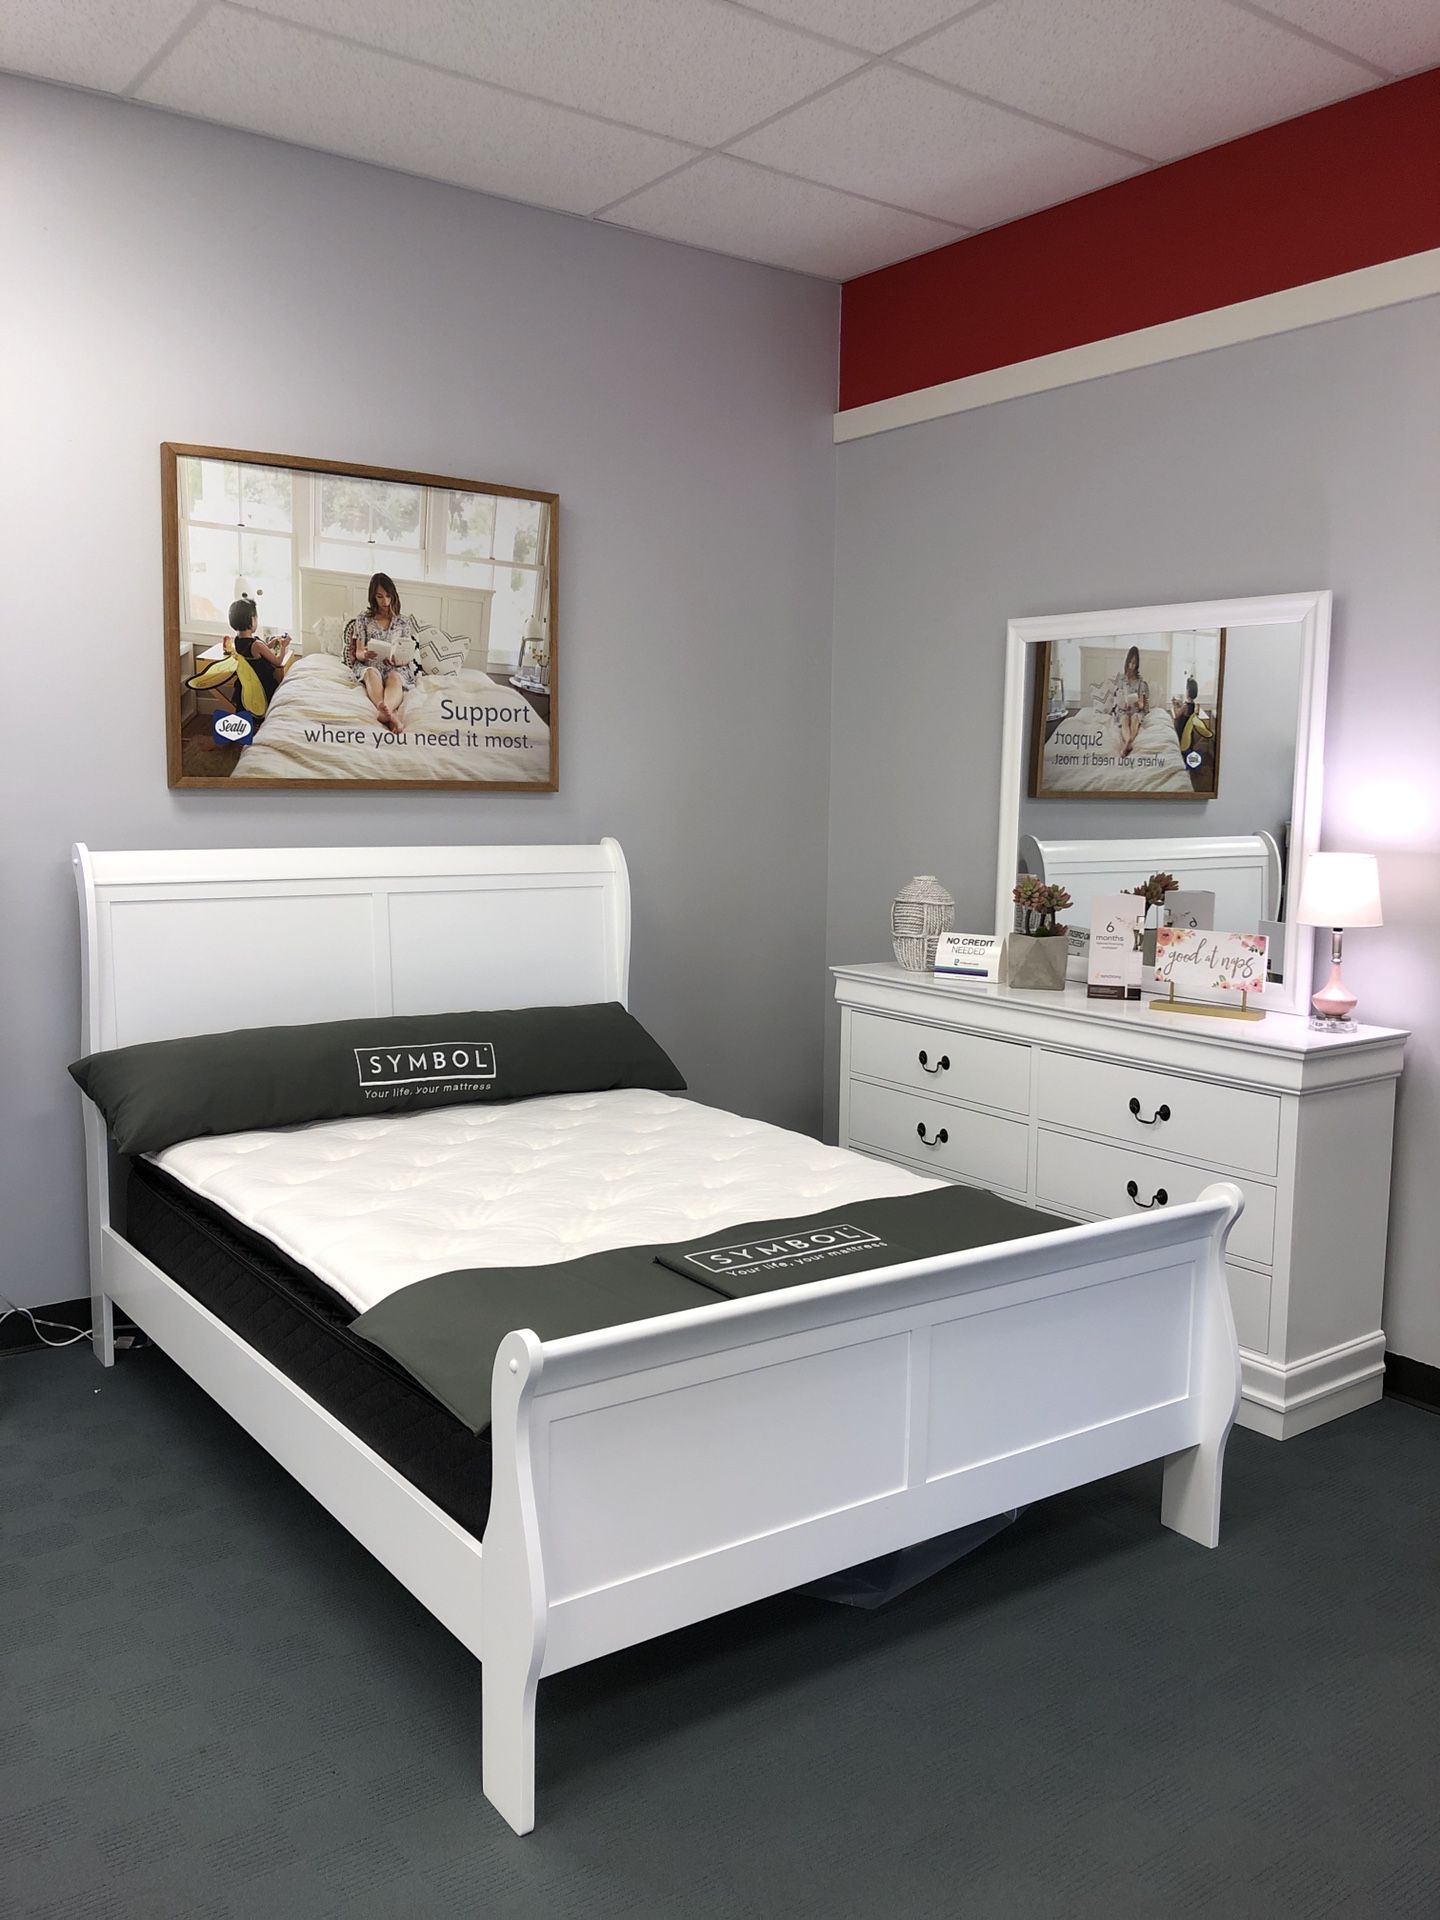 Bedroom sets on Sale - Twin/Full/Queen/King available